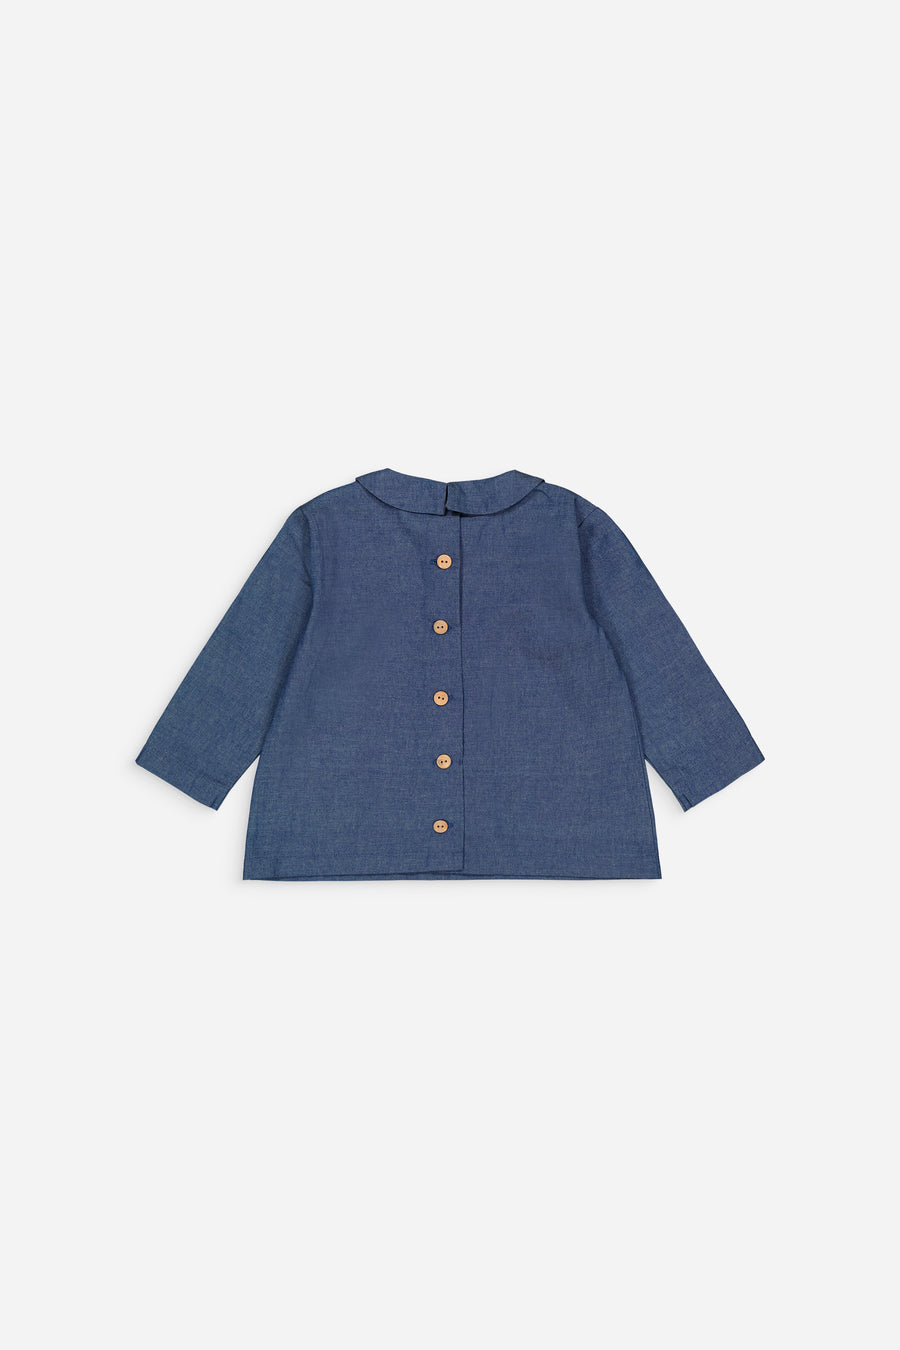 Chemisier Didier ##2310 - Chambray